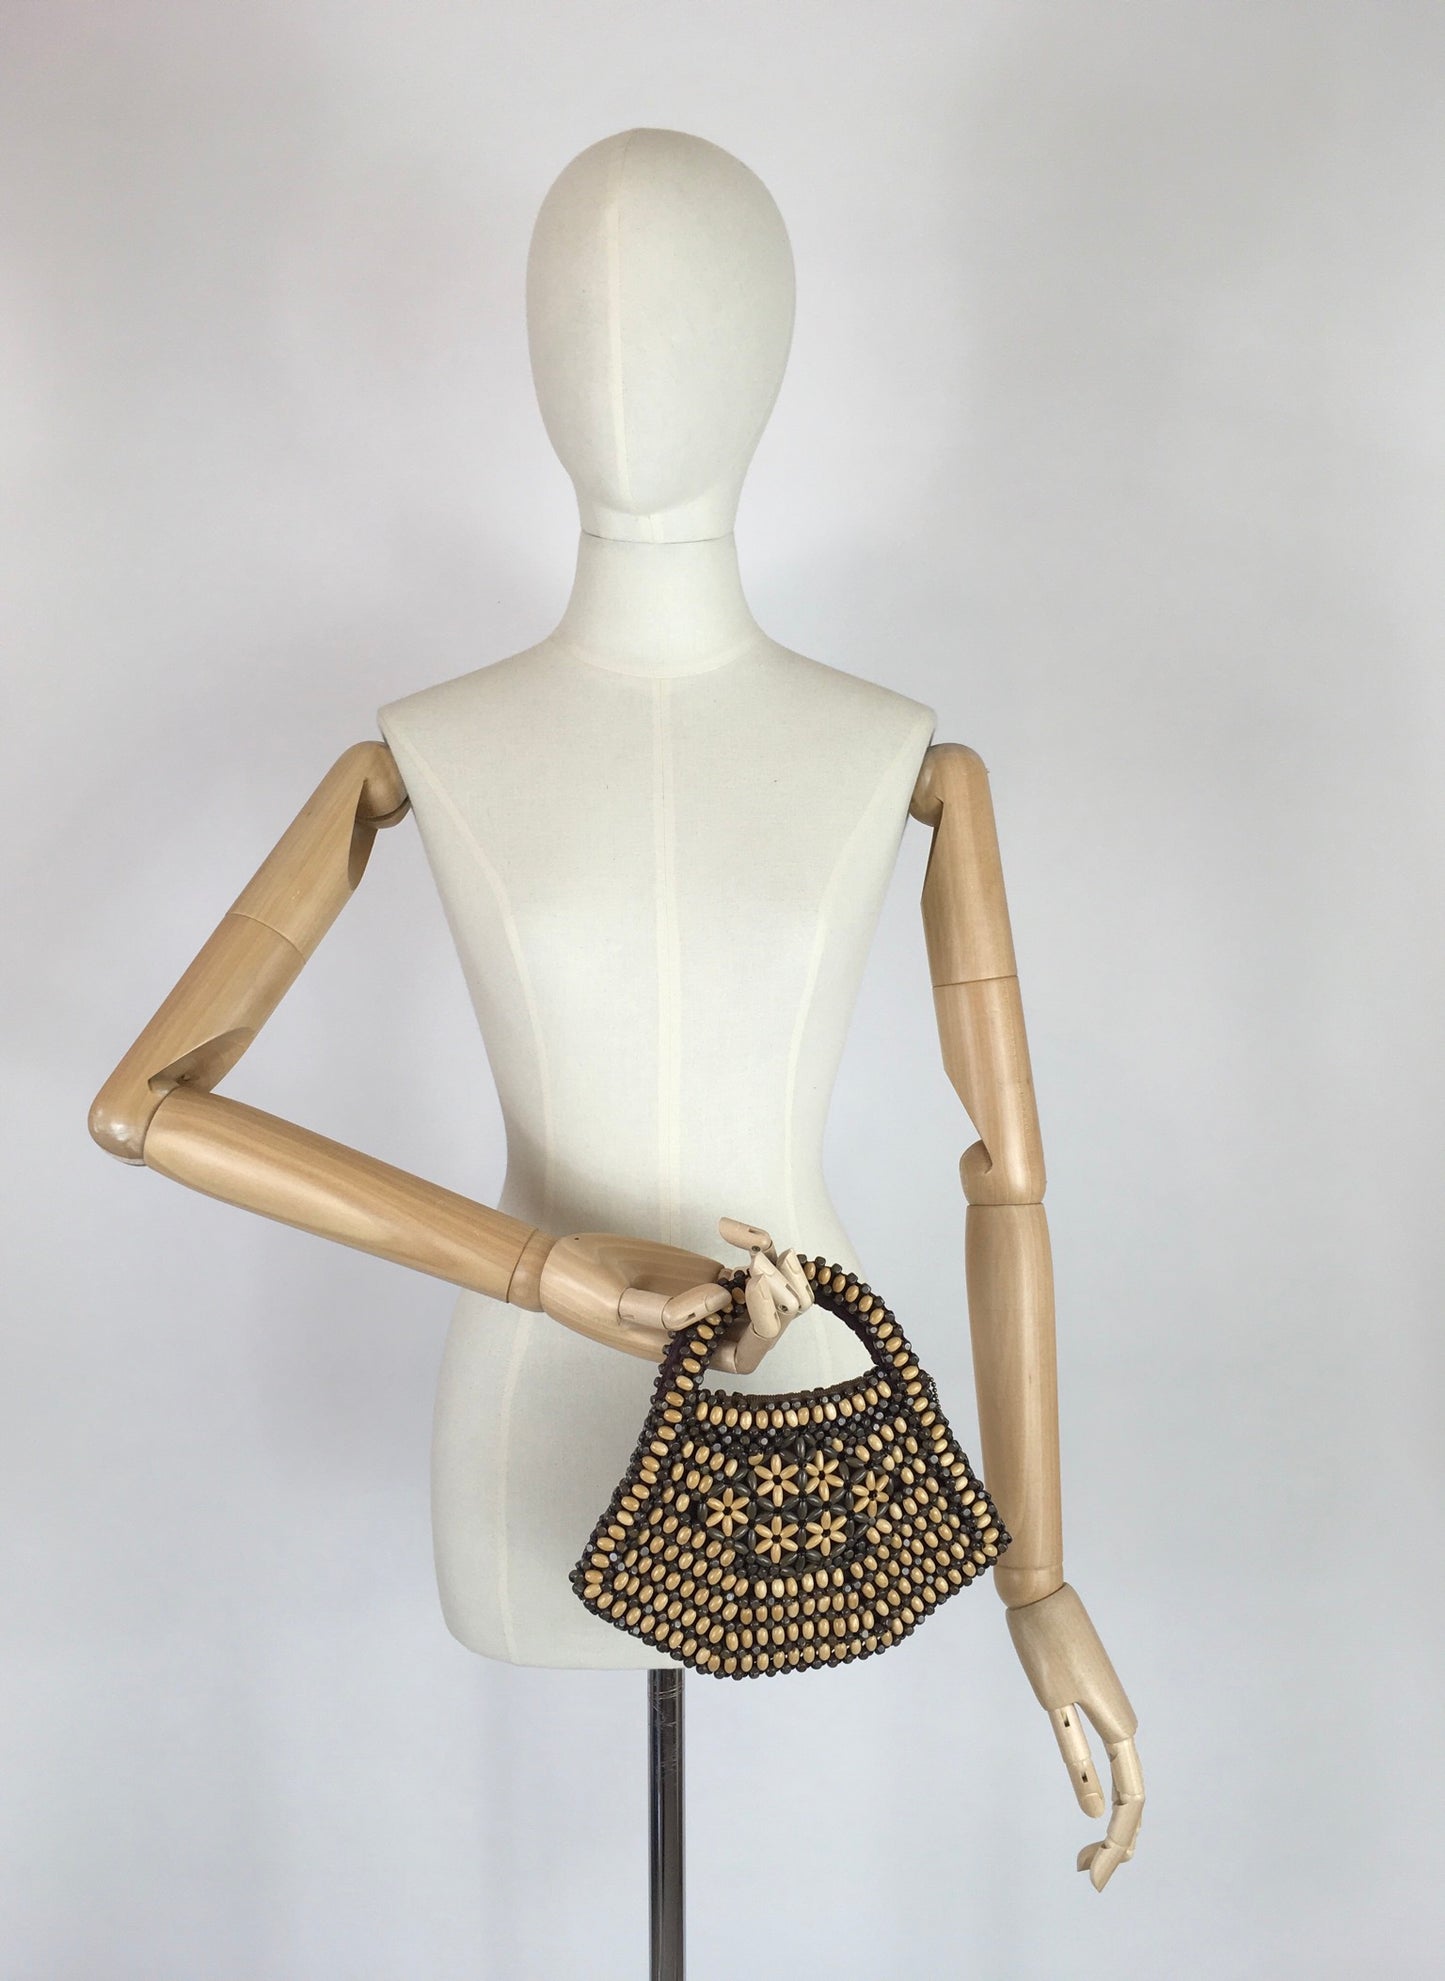 Original 1940’s Wooden Beaded Bag - In A Fabulous Shape with 2 tone beadwork